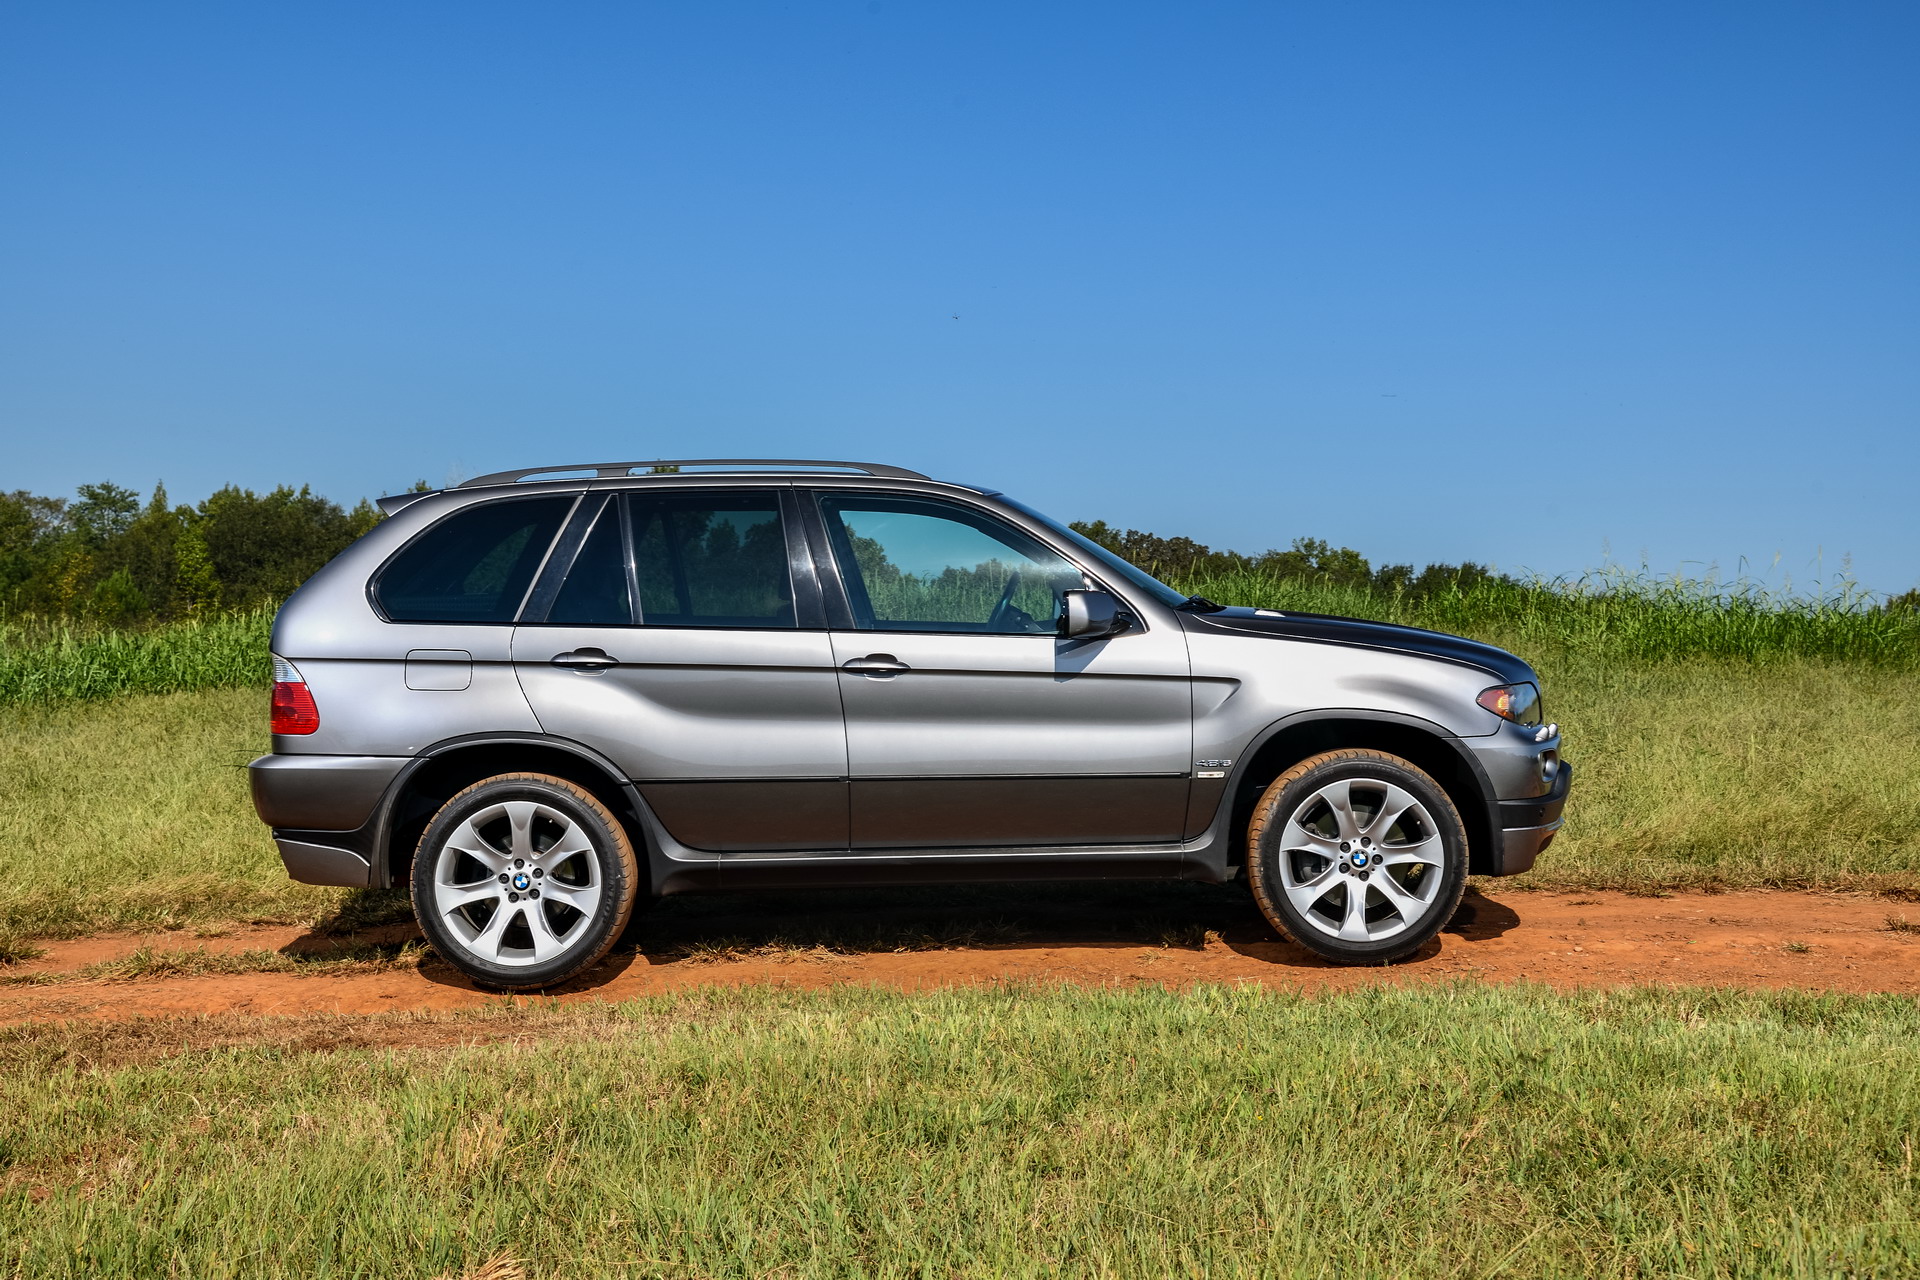 Video: BMW E53 X5 buying tips from Tiff Needell